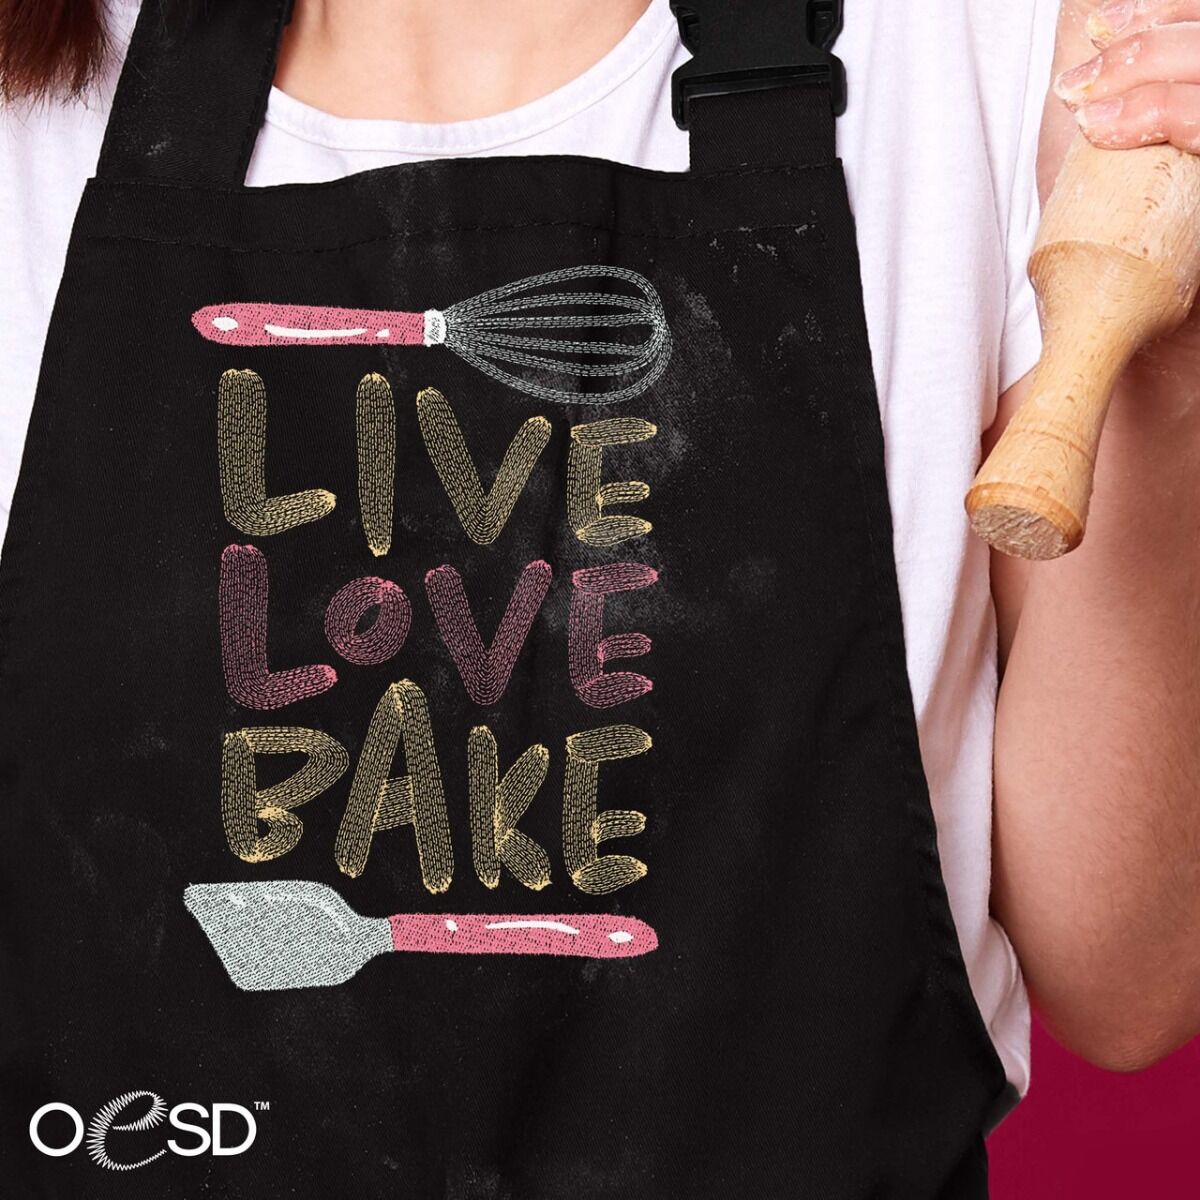 OESD Live Love Bake Embroidery Collection
,OESD Live Love Bake Embroidery Collection
,OESD Live Love Bake Embroidery Collection
